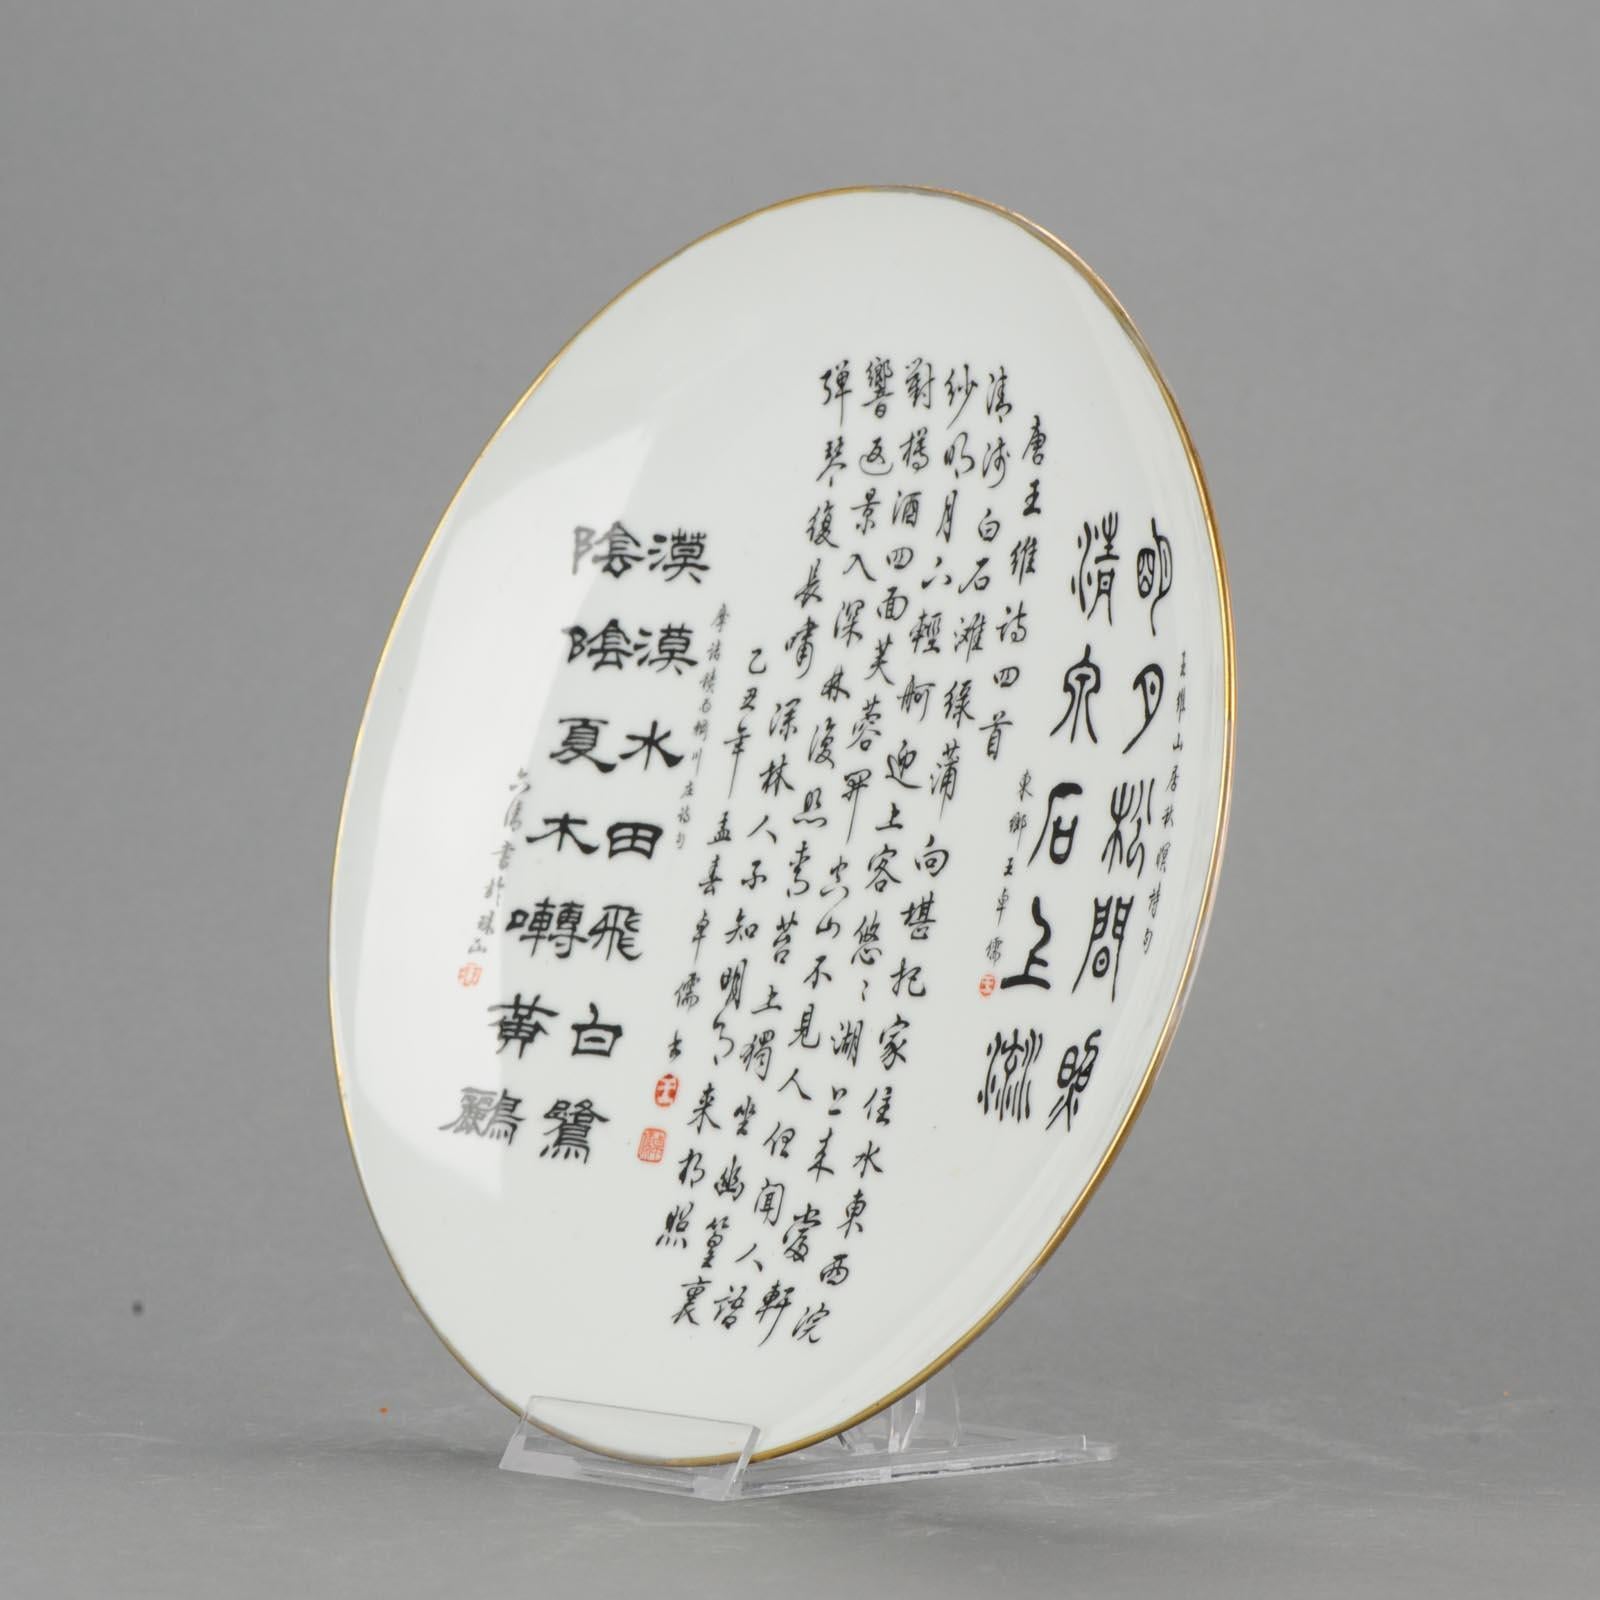 Perfect Calligraphy Plate Chinese Porcelain LiuQing and Wang Zhuo Ru, Dated 1985 In Good Condition For Sale In Amsterdam, Noord Holland